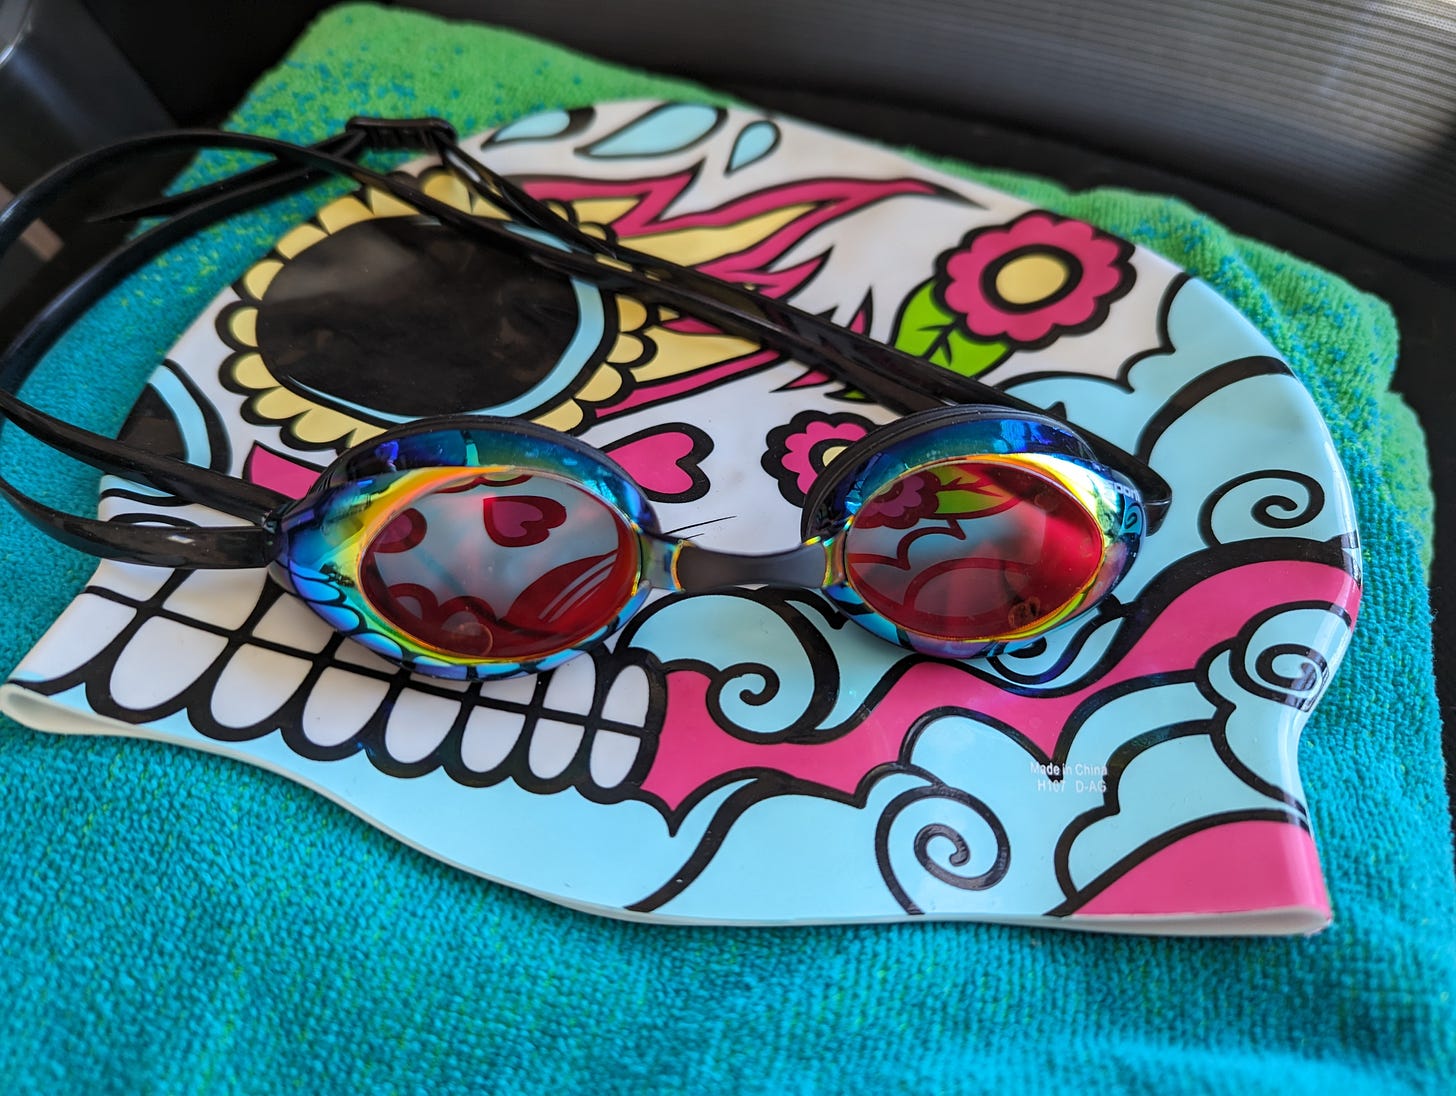 A photo of some of Kate's swim gear: a blue and green beach towel with a sugar skull swim cap on top of it. A pair of rainbow goggles rests on top of the swim cap.